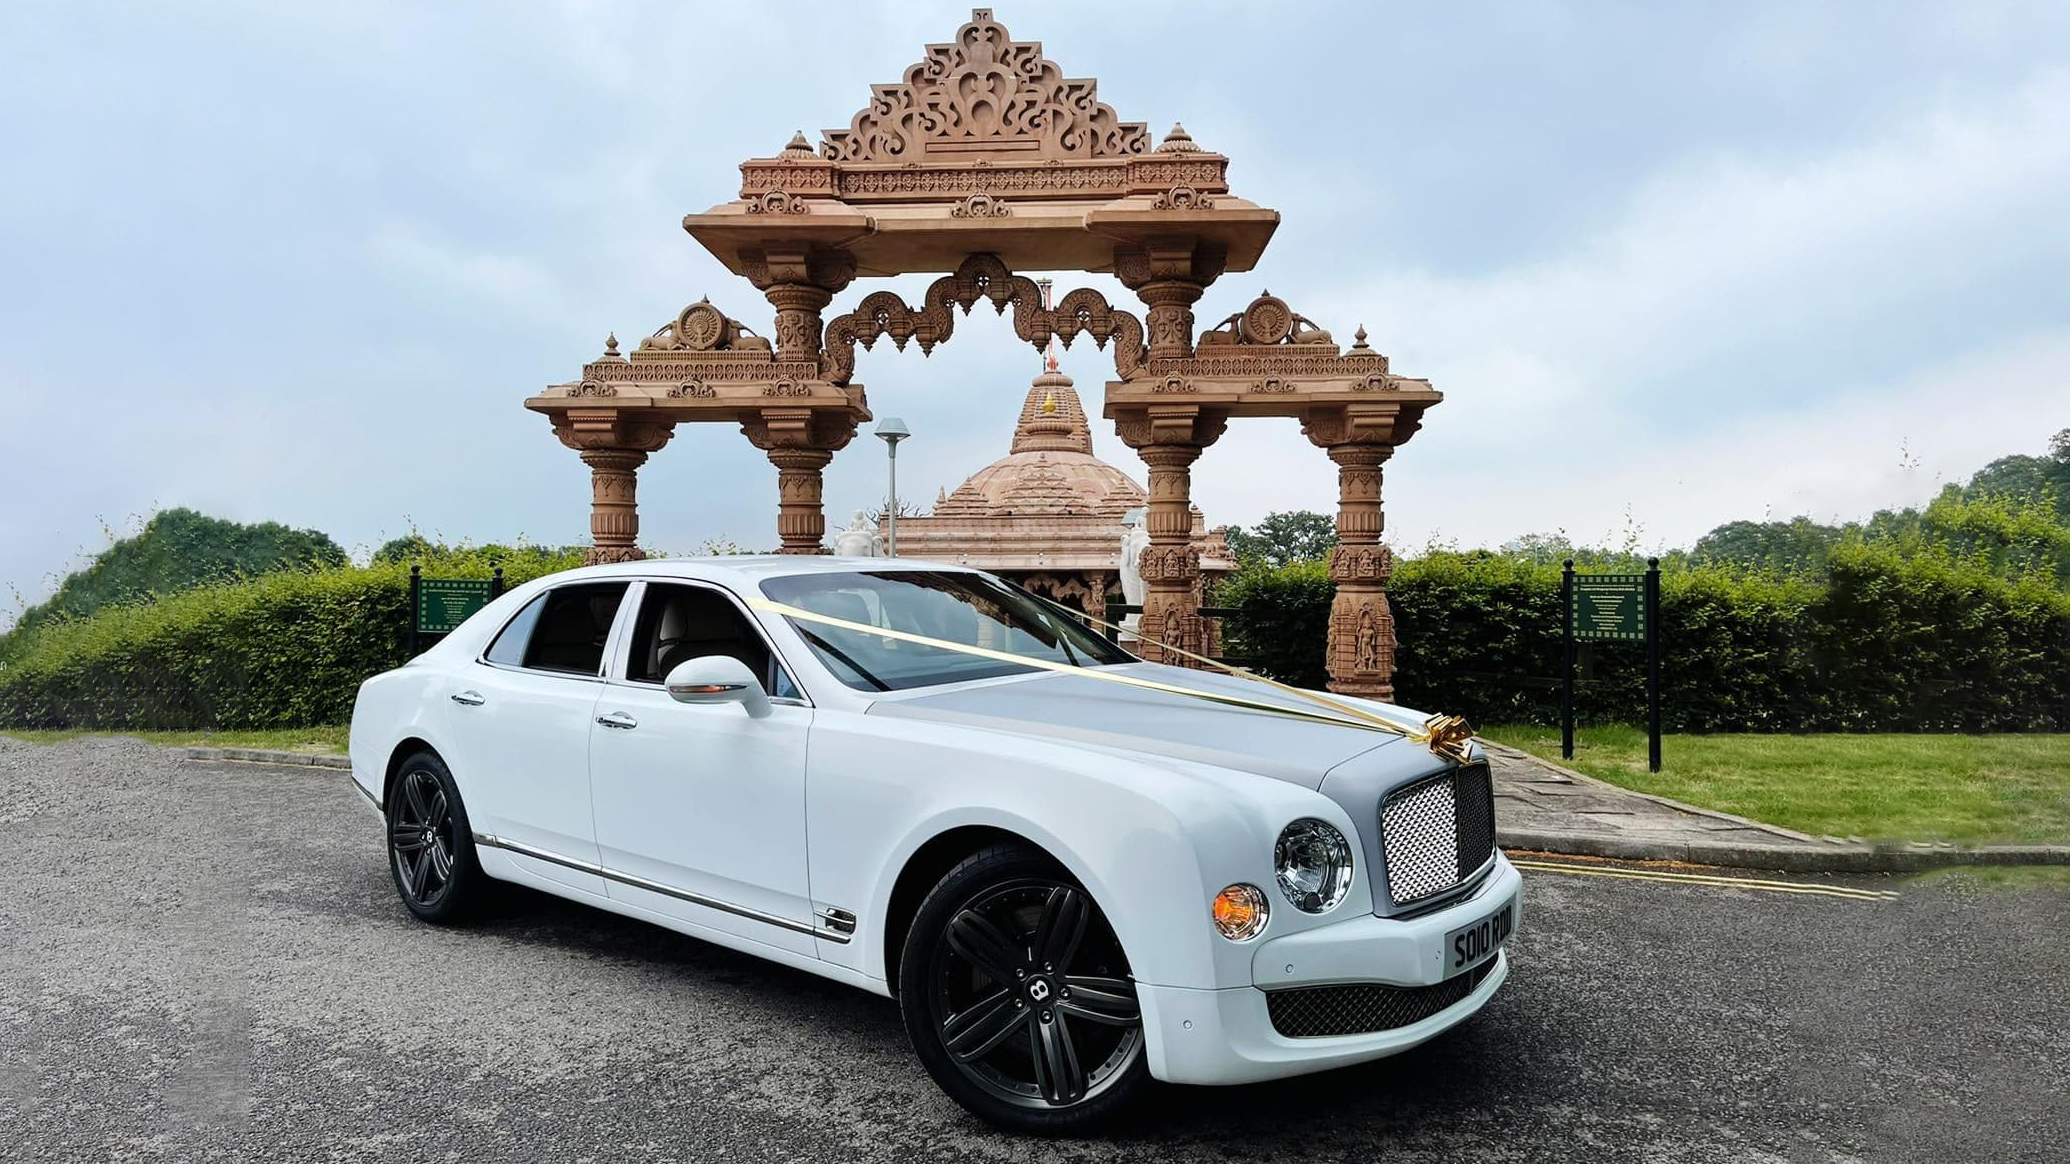 Modern Bentley Mulsanne with Black alloy wheels and Gold ribbons park in front of an Asian Temple in Bedford.